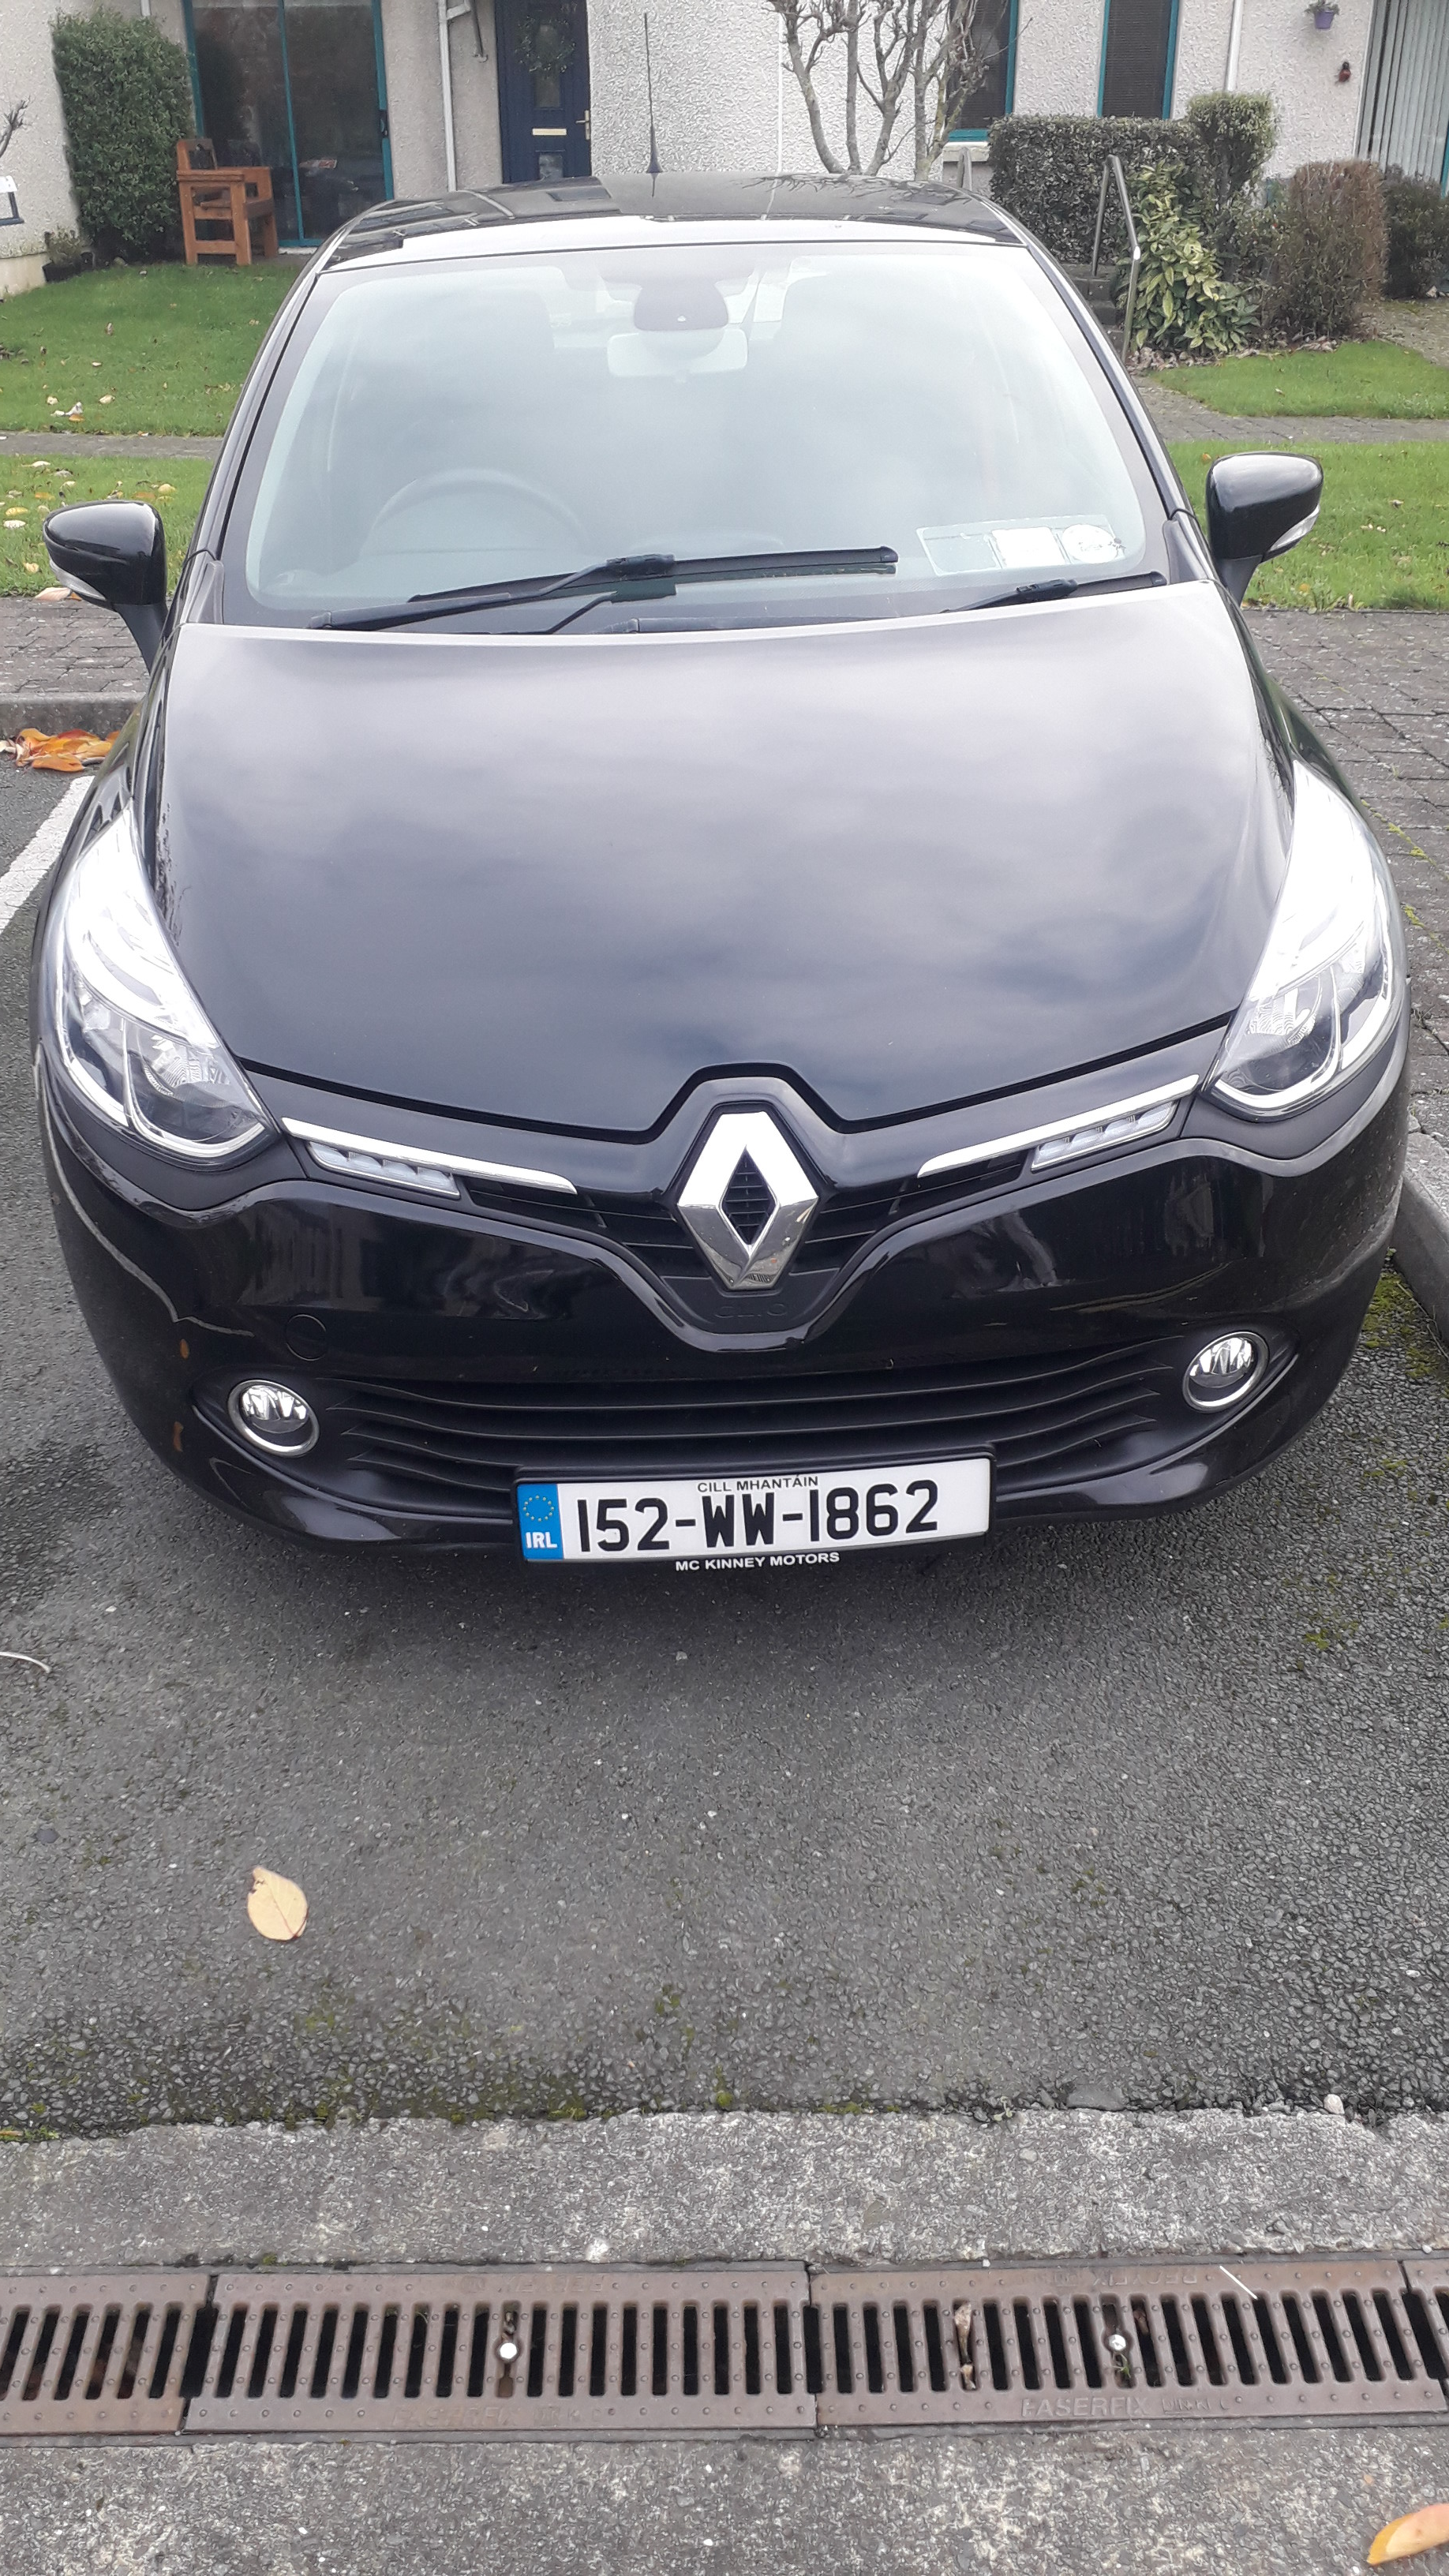 Used Renault Clio 2015 in Wicklow